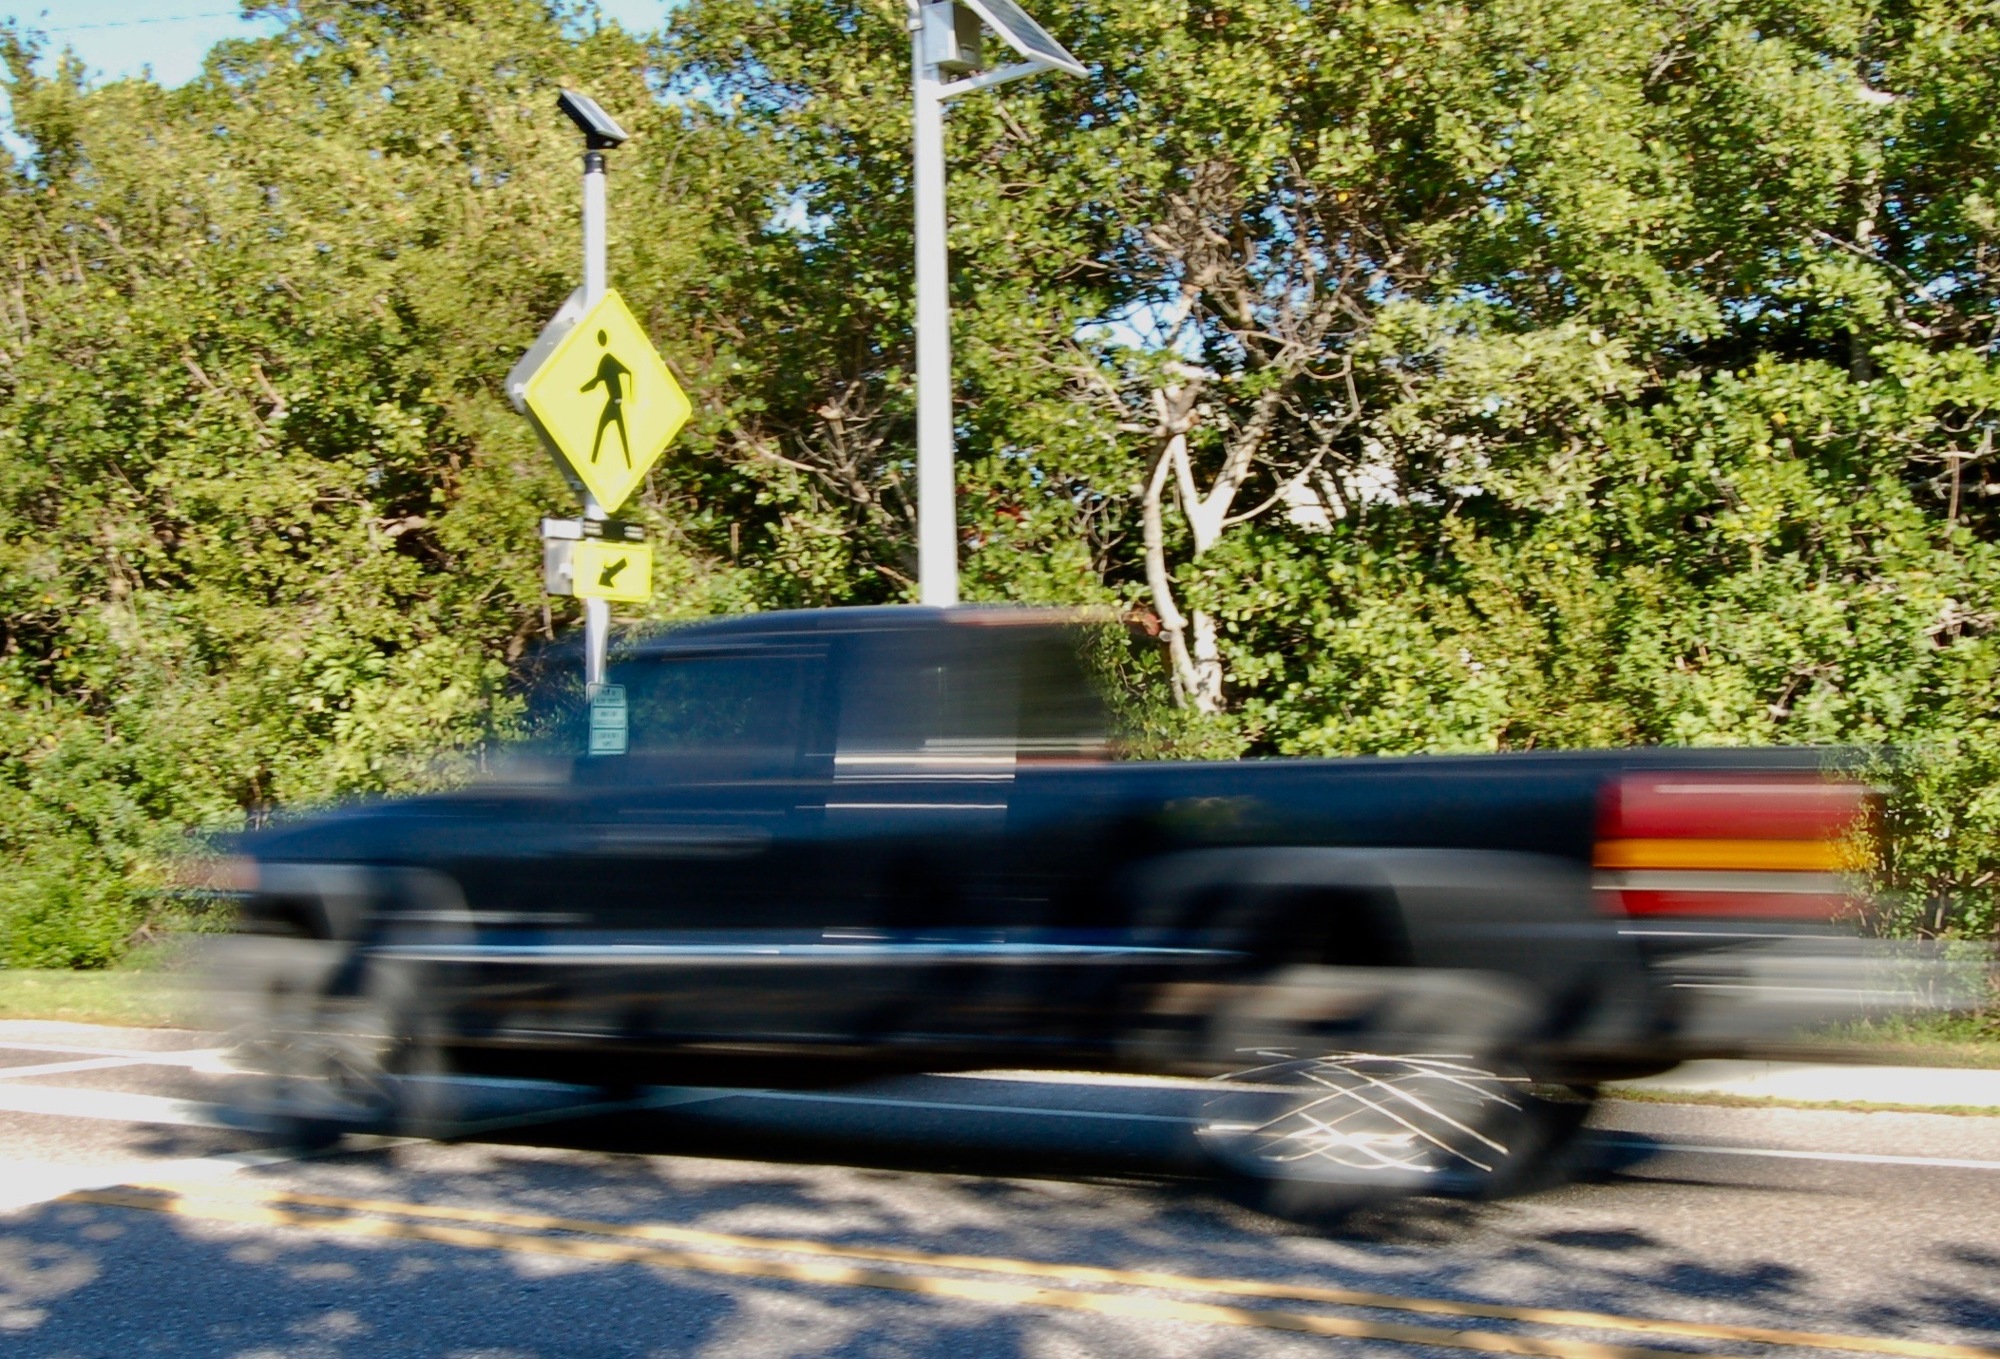 Vehicles are required to stop when the lights are activated and pedestrians are present. 